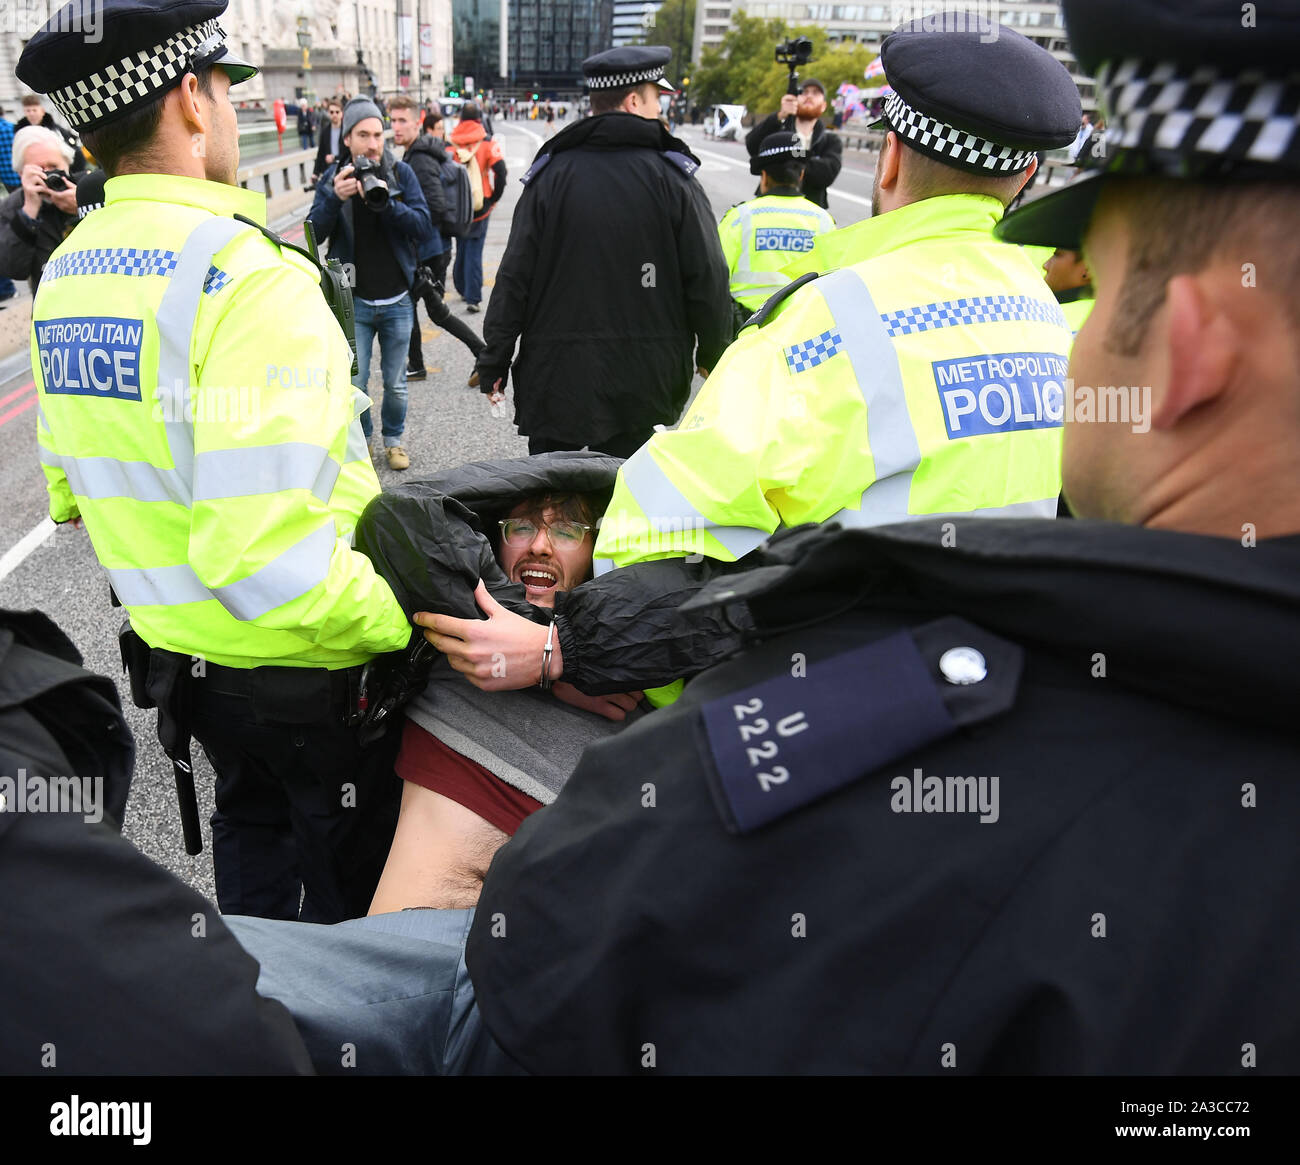 A protester being arrested on Westminster Bridge, during an Extinction Rebellion (XR) protest in Westminster, London. Stock Photo